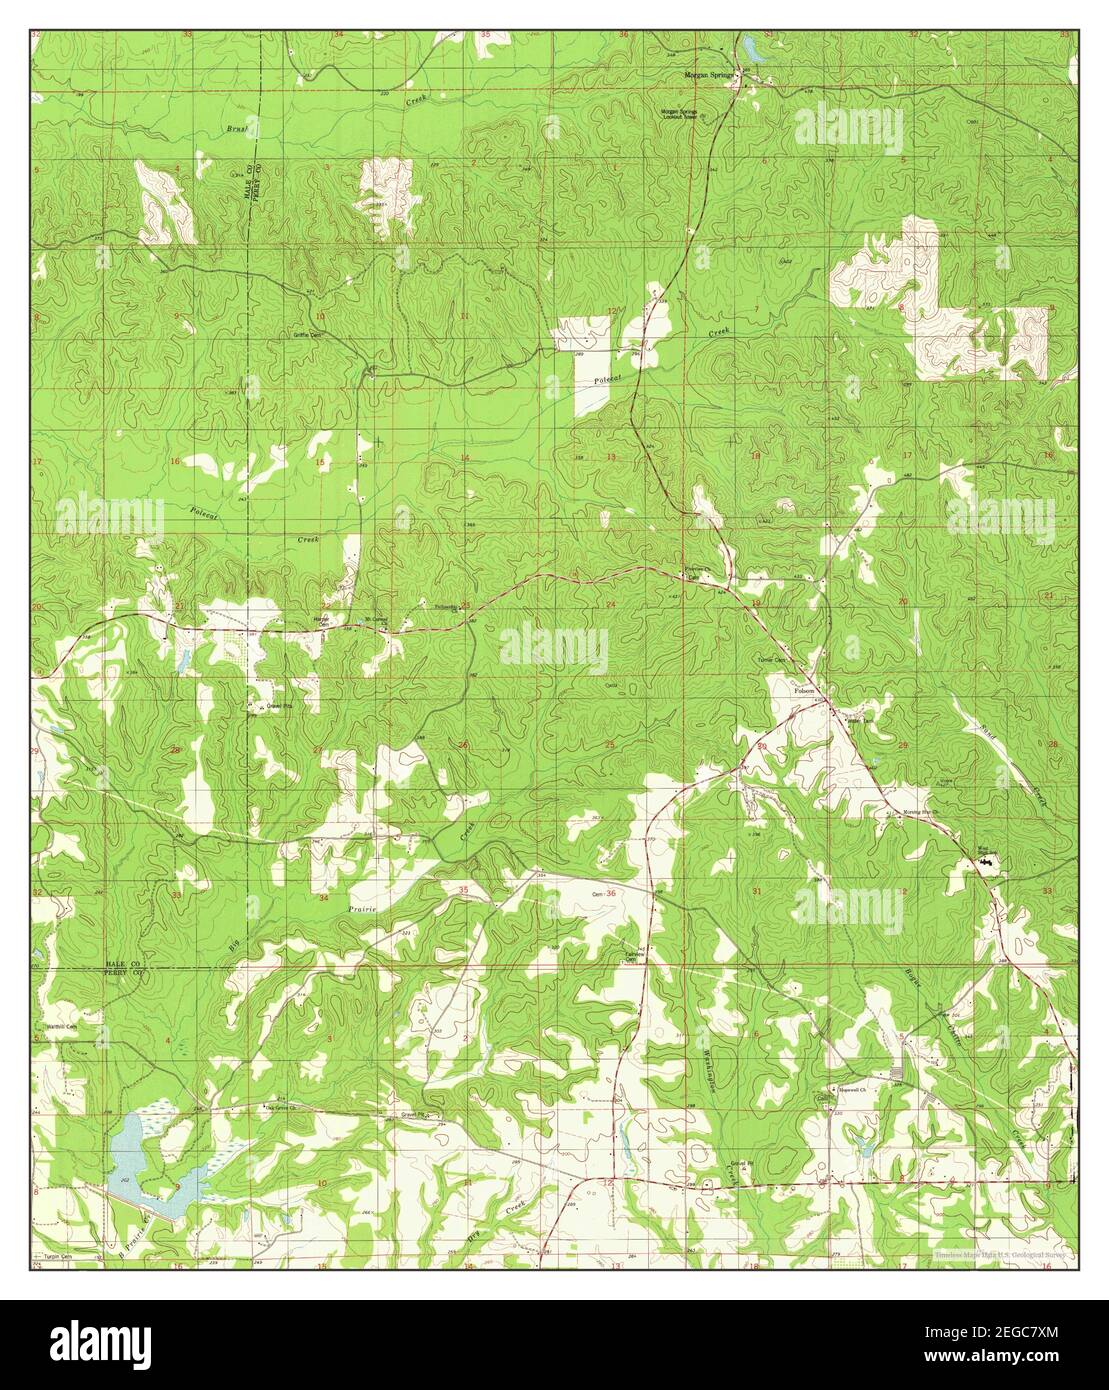 Morgan Springs, Alabama, map 1979, 1:24000, United States of America by Timeless Maps, data U.S. Geological Survey Stock Photo